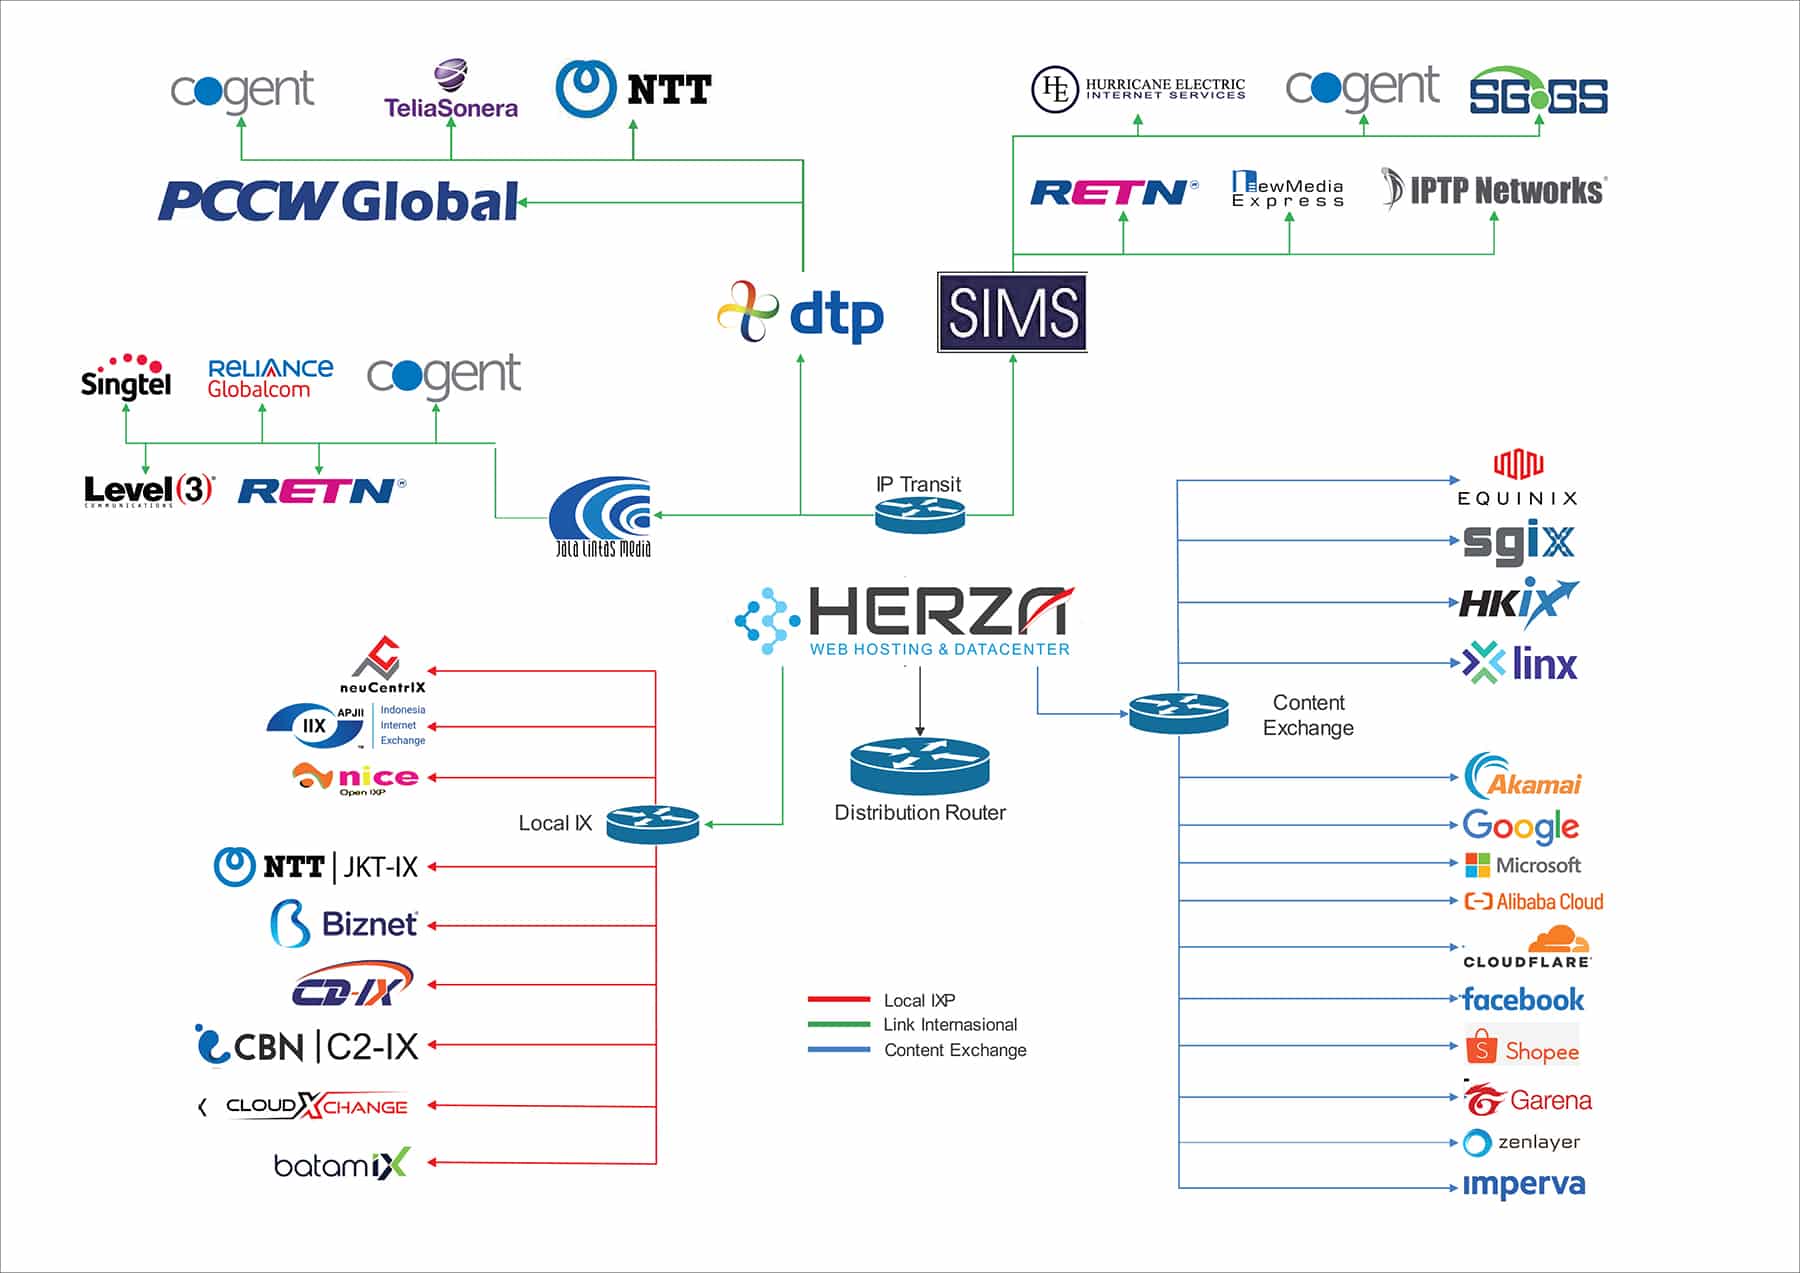 Network Topology Herza Cloud